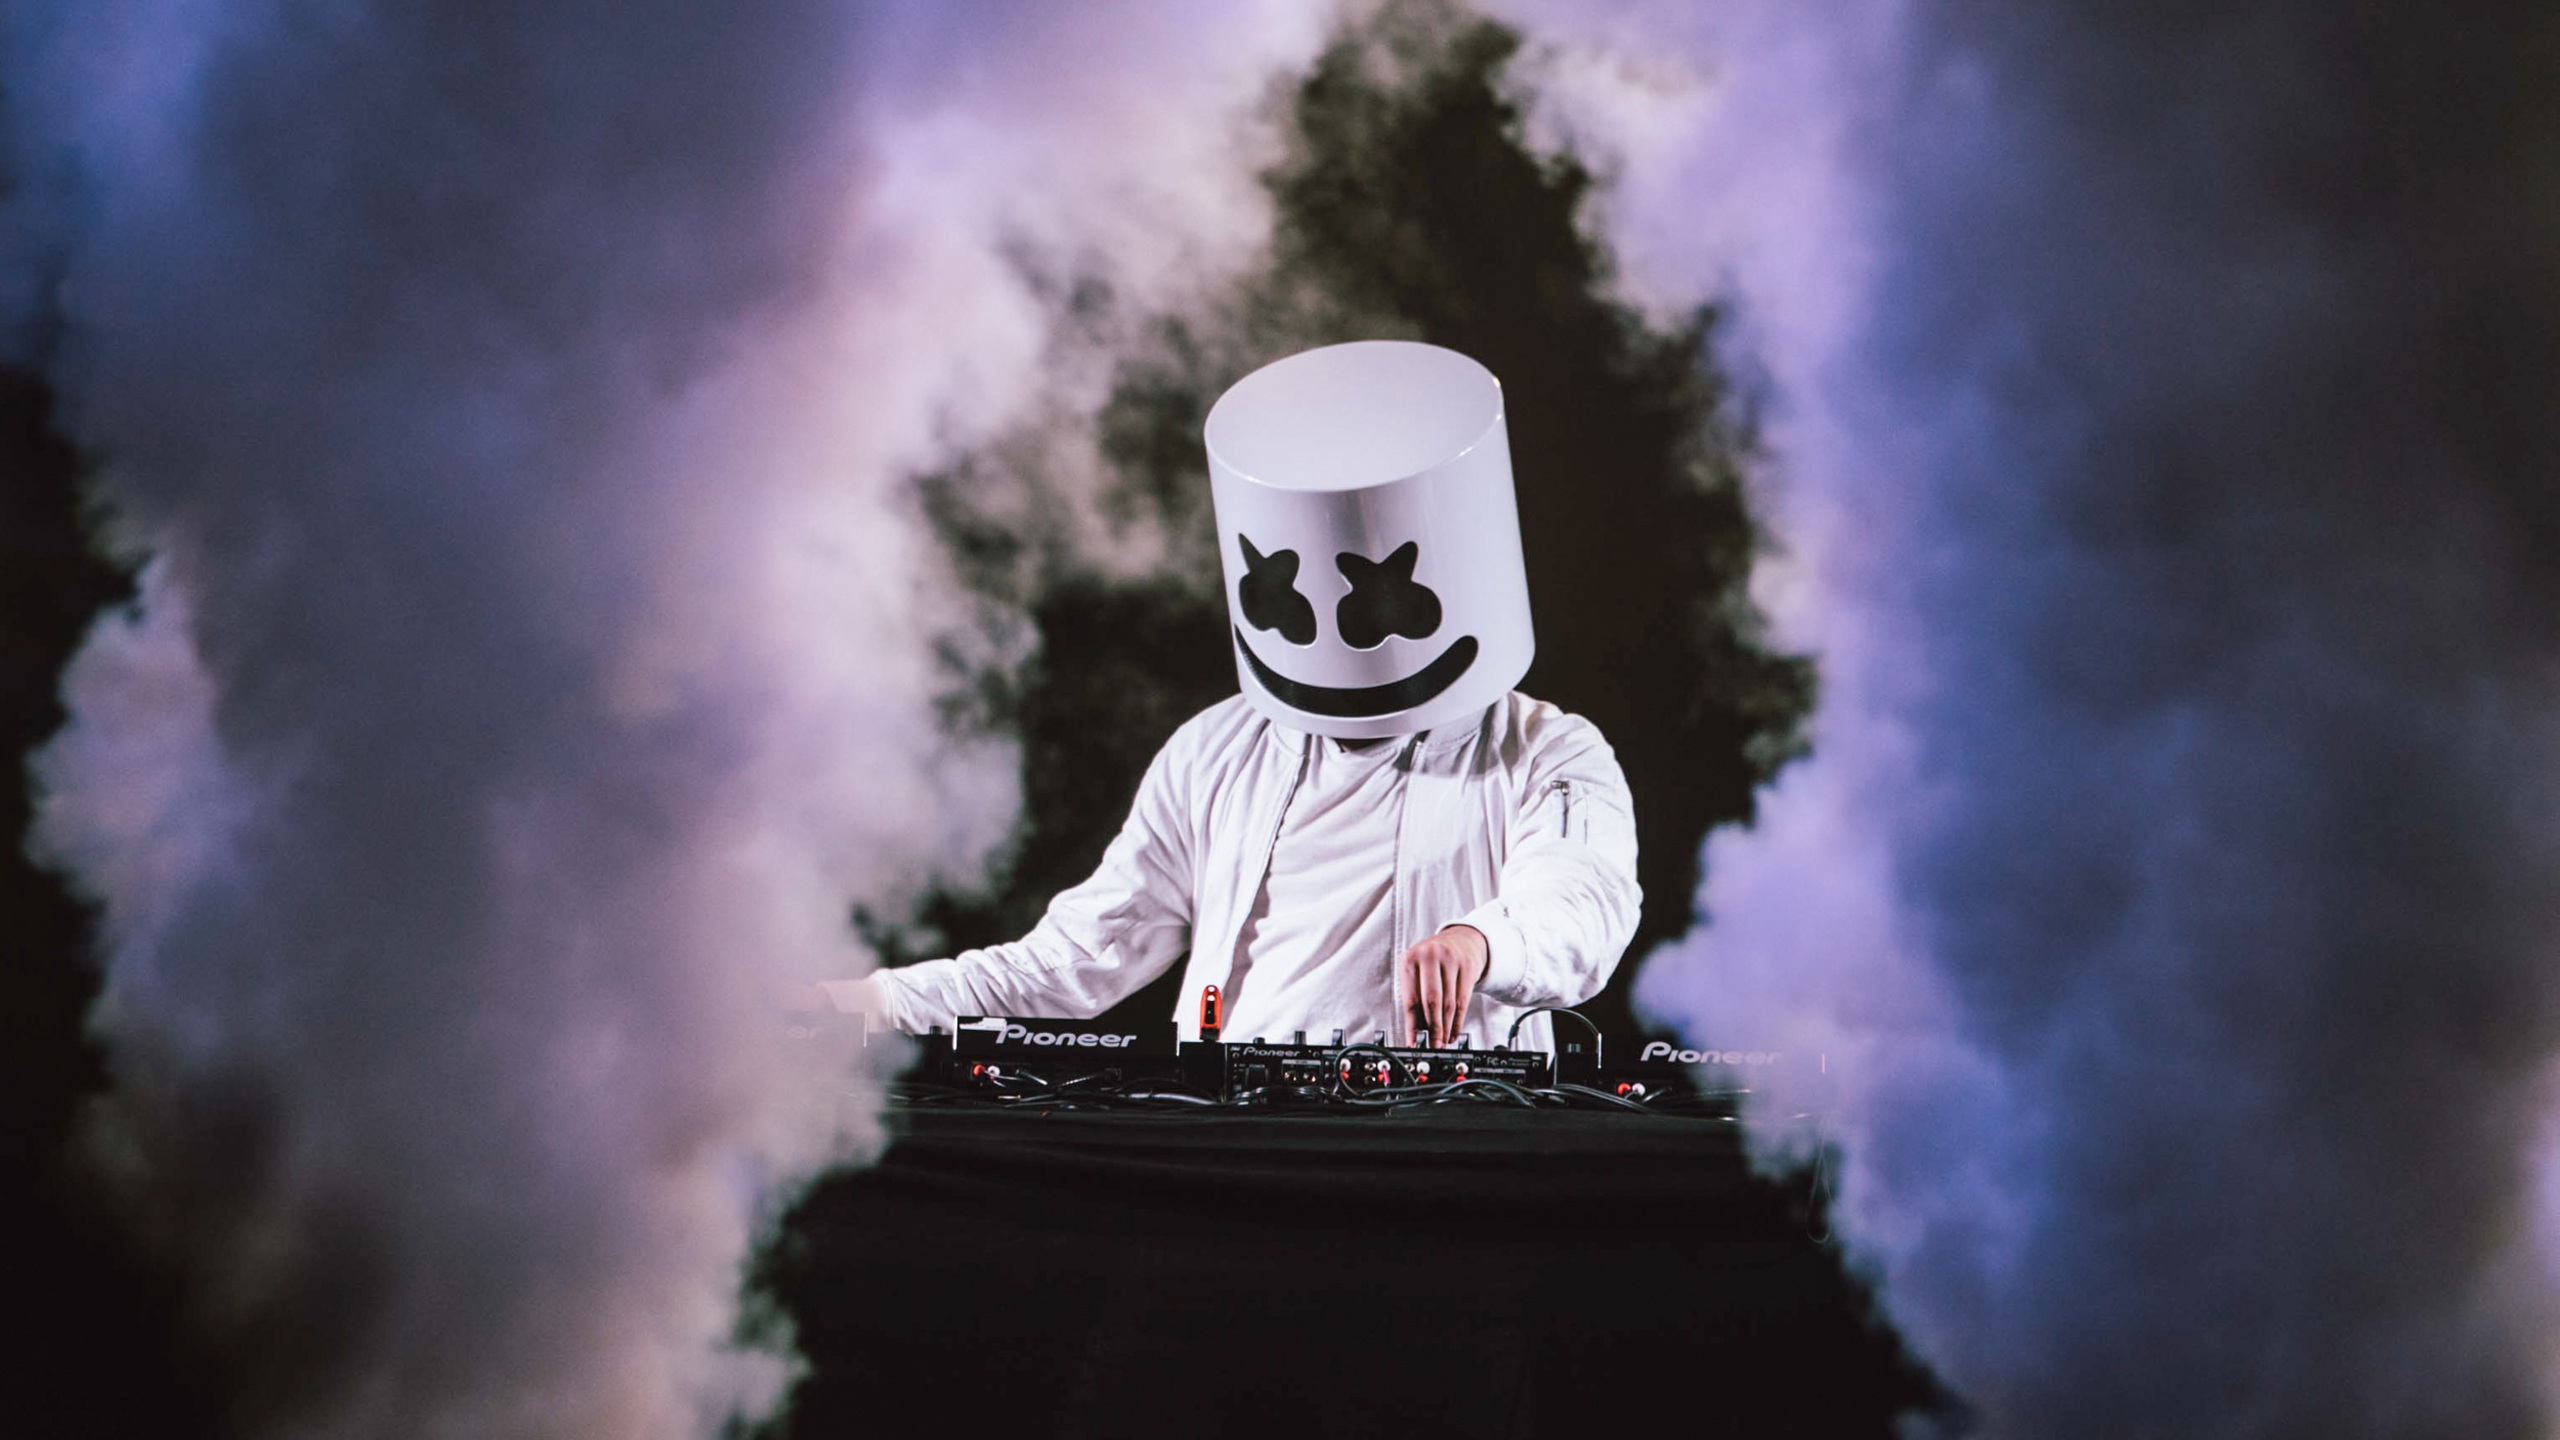 2560x1440 Marshmello Music Festival 2017 1440P Resolution HD 4k Wallpapers, Images, Backgrounds, Photos and Pictures